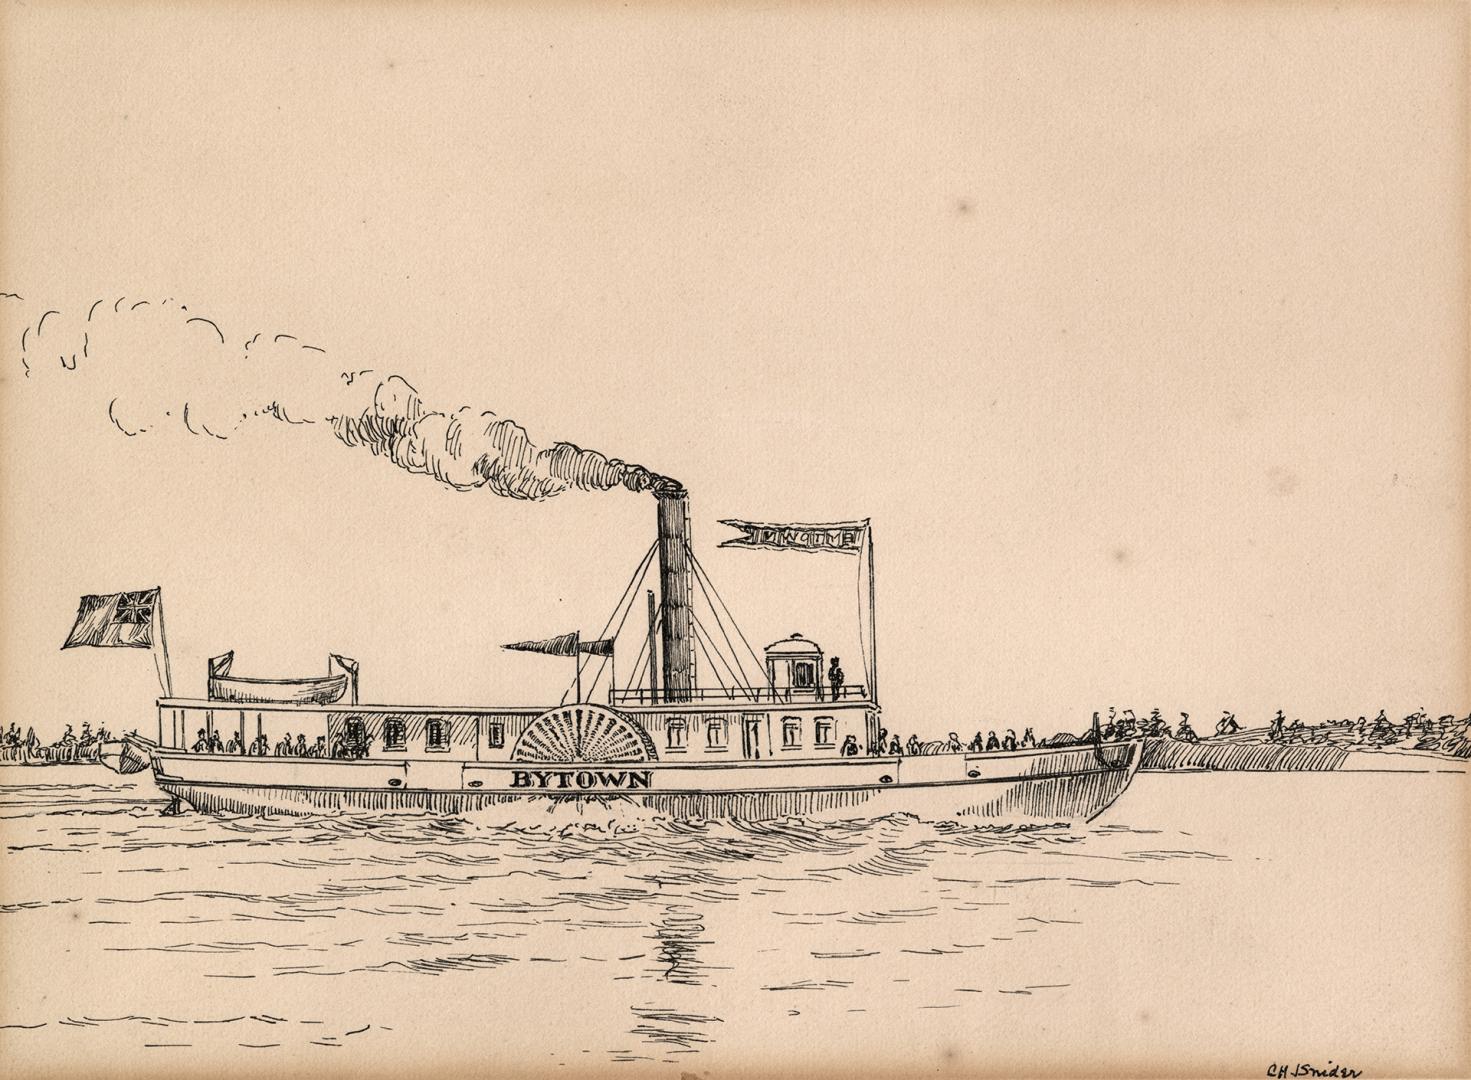 Steamer "Bytown", 1835-50 (Rideau Canal & St. Lawrence River)